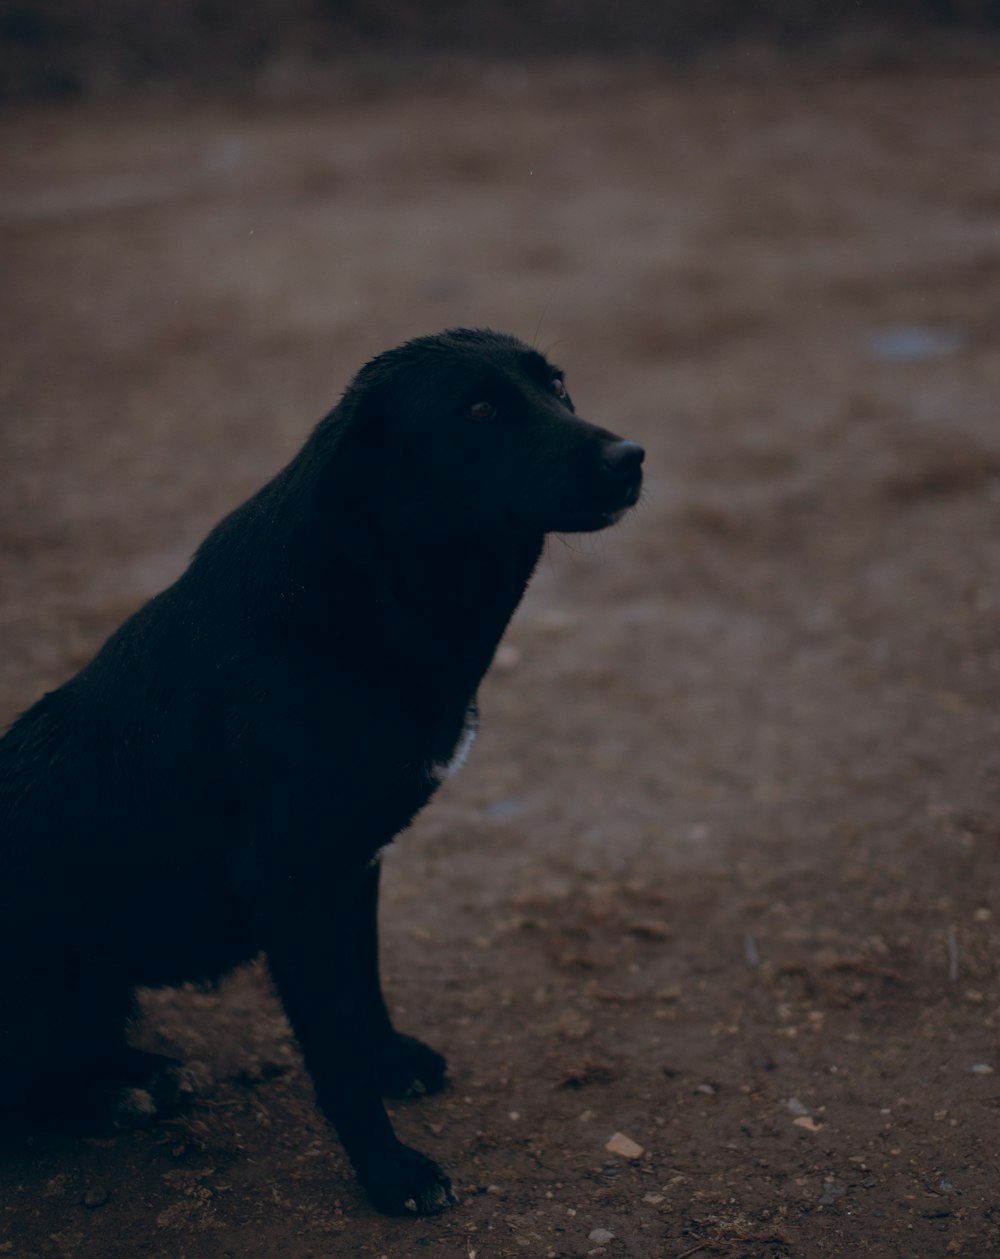 a black dog sitting on top of a dirt field